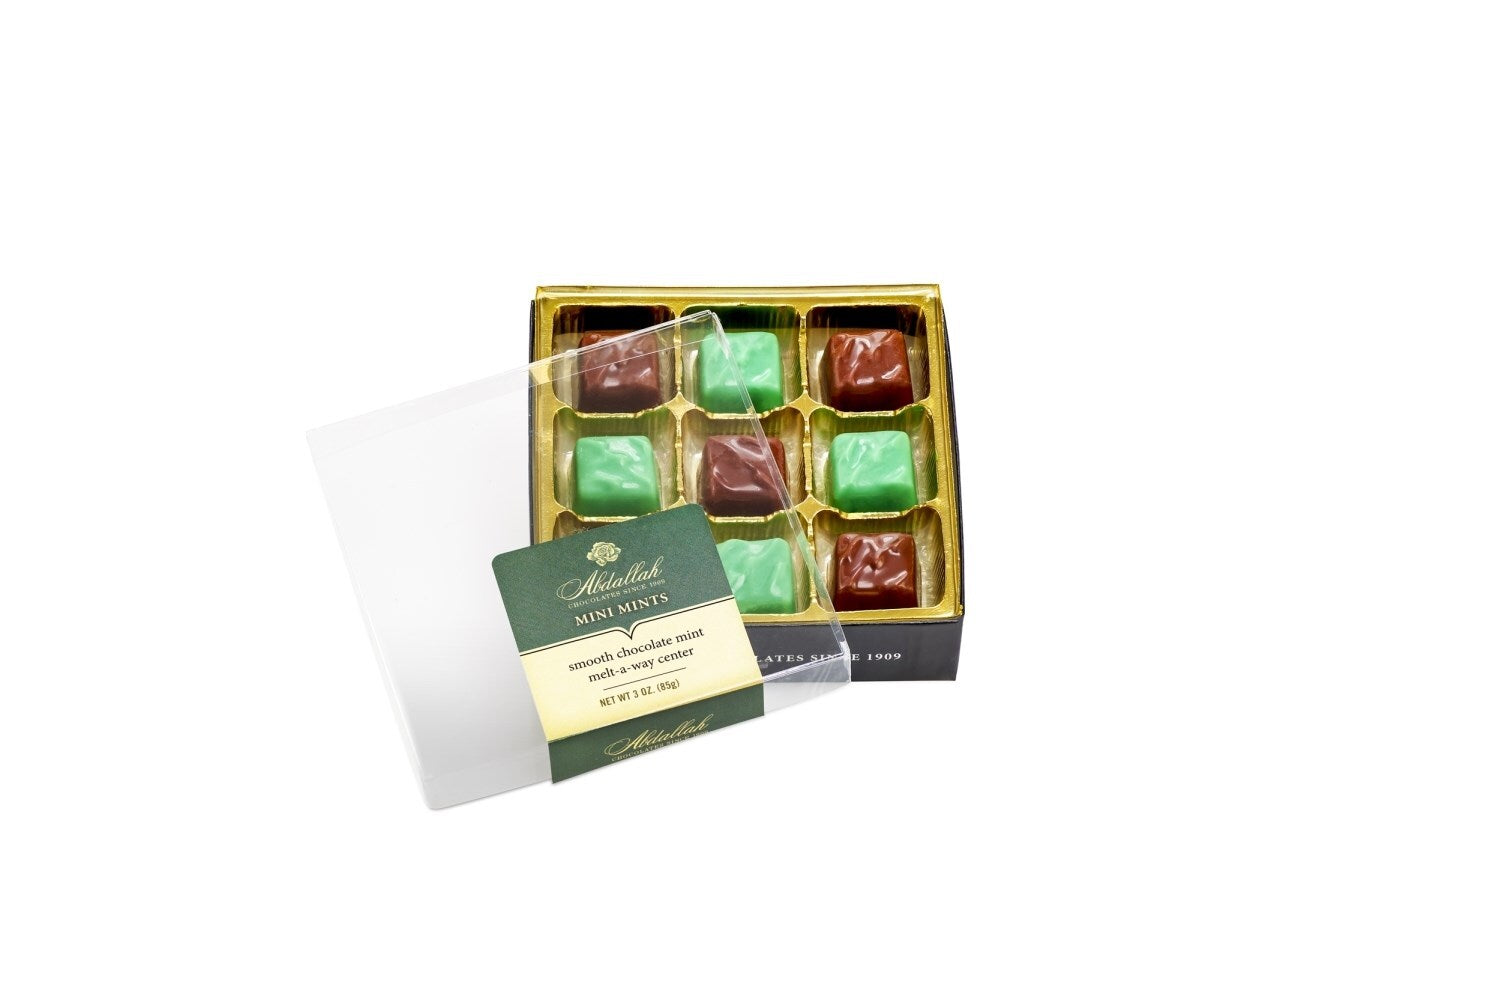 Abdallah Chocolate Mini Mints with a smooth chocolate mint melt-a-way center. 3 oz Gift Box of Chocolates.